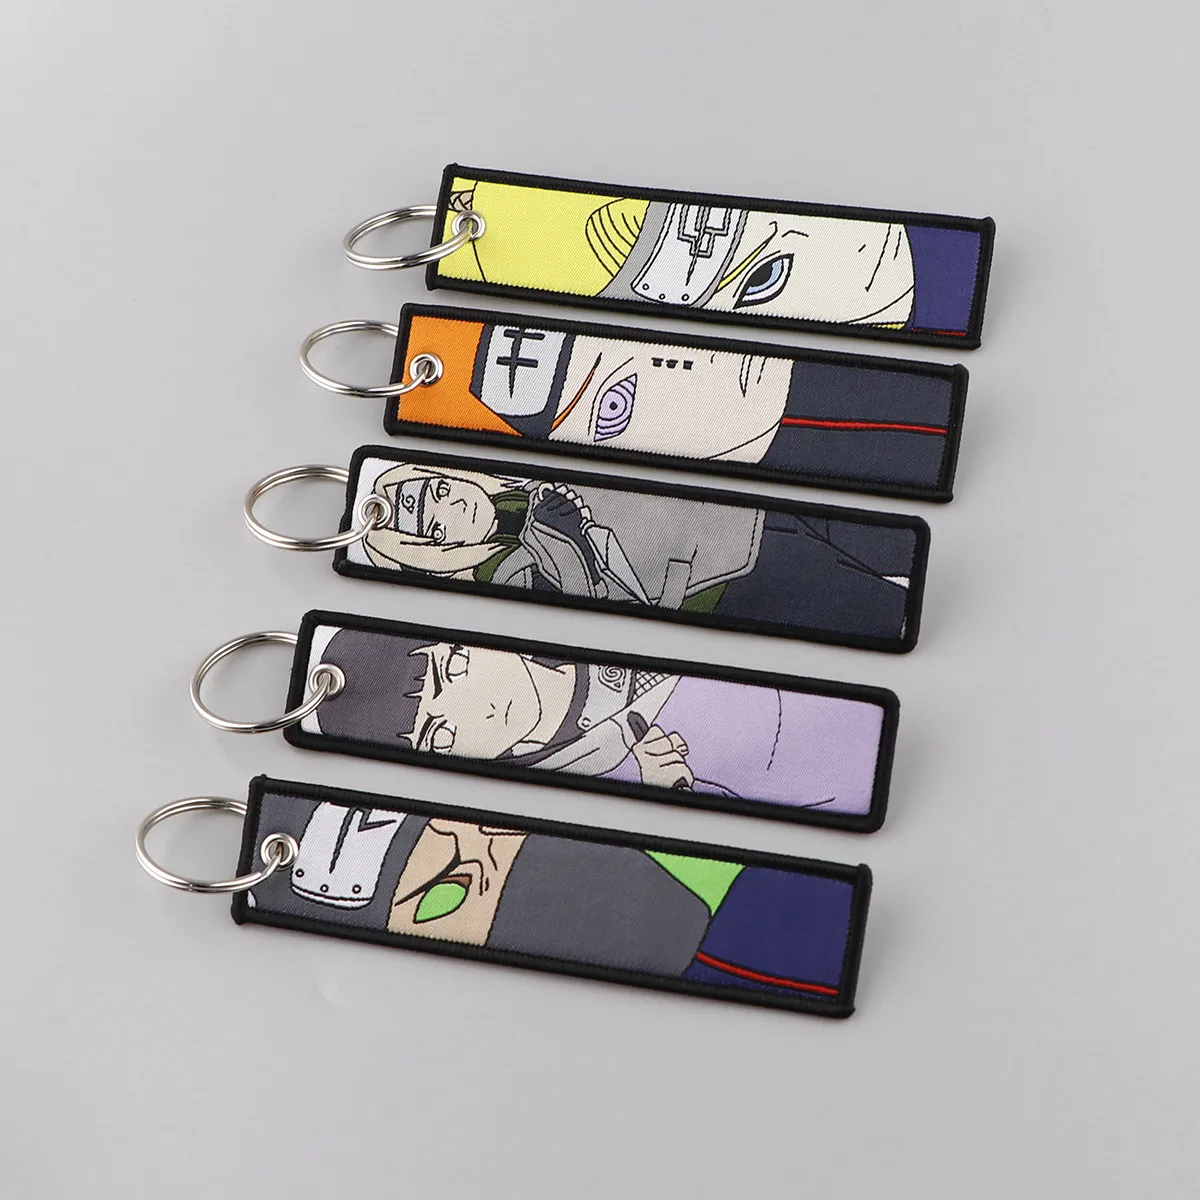 Keychains & Lanyards Various Types Of Cartoon Cool Key Tag Embroidery Fobs For Motorcycles Cars Bag Backpack Keychain Fashion Ring Gi Otd5G